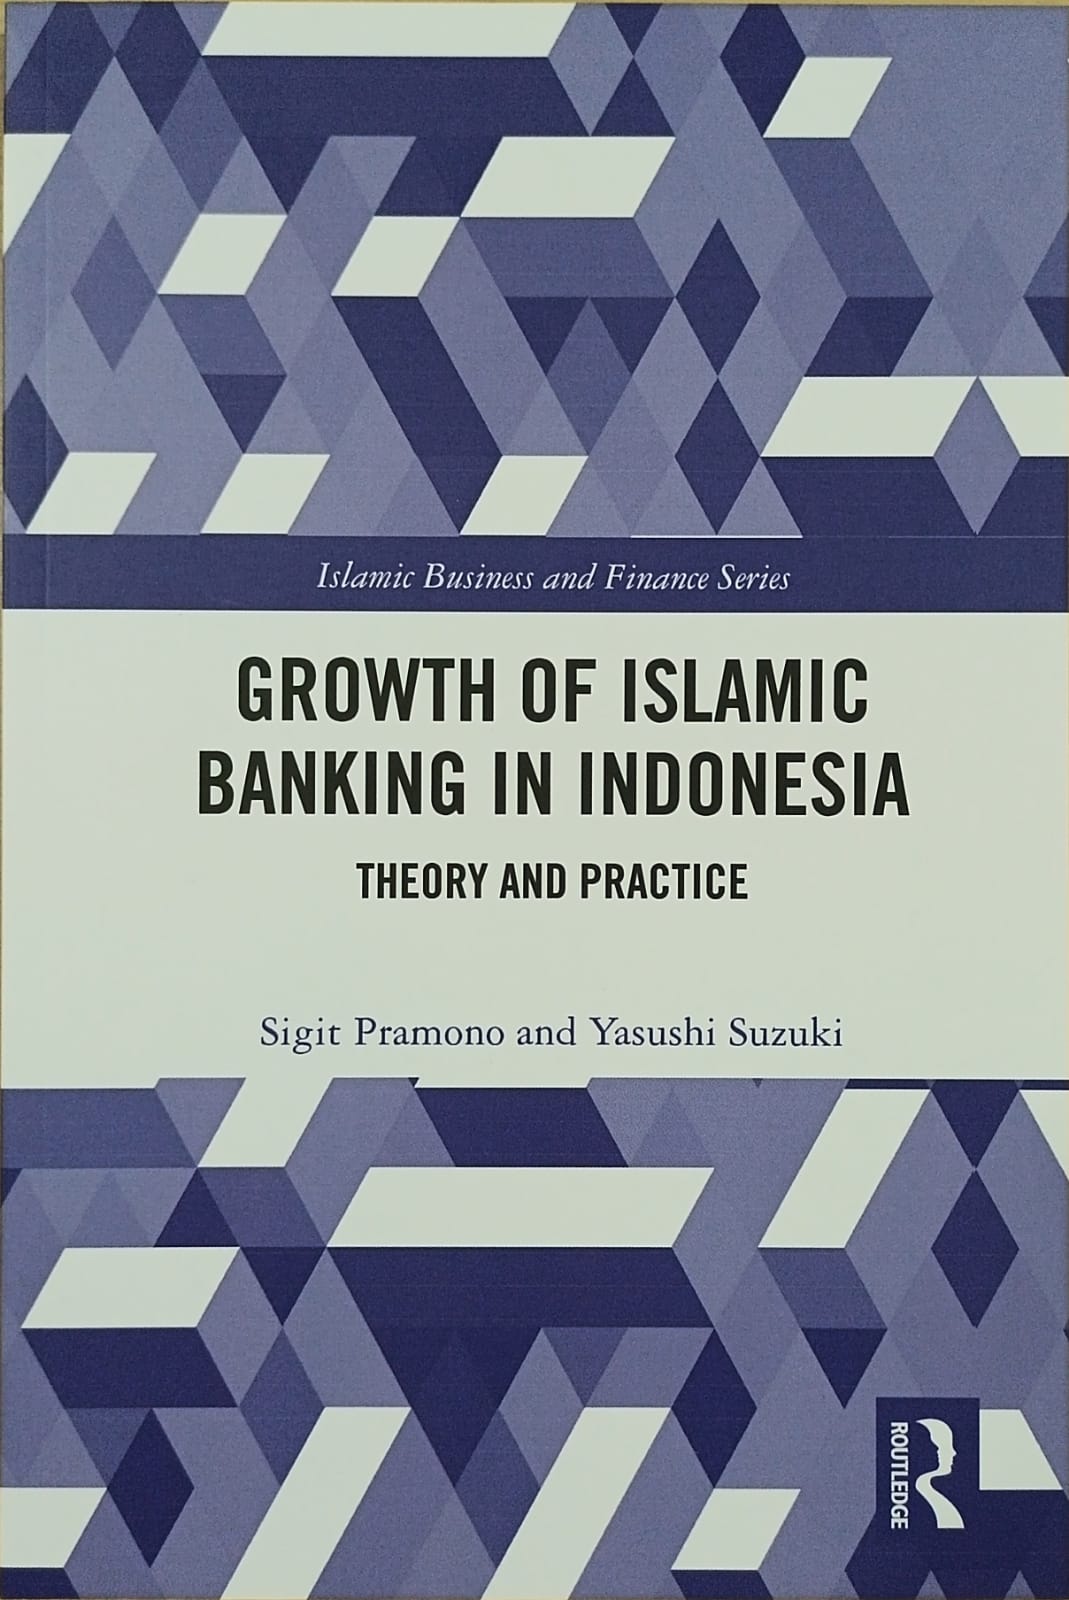 Growth of islamic banking in indonesia : theory and practice